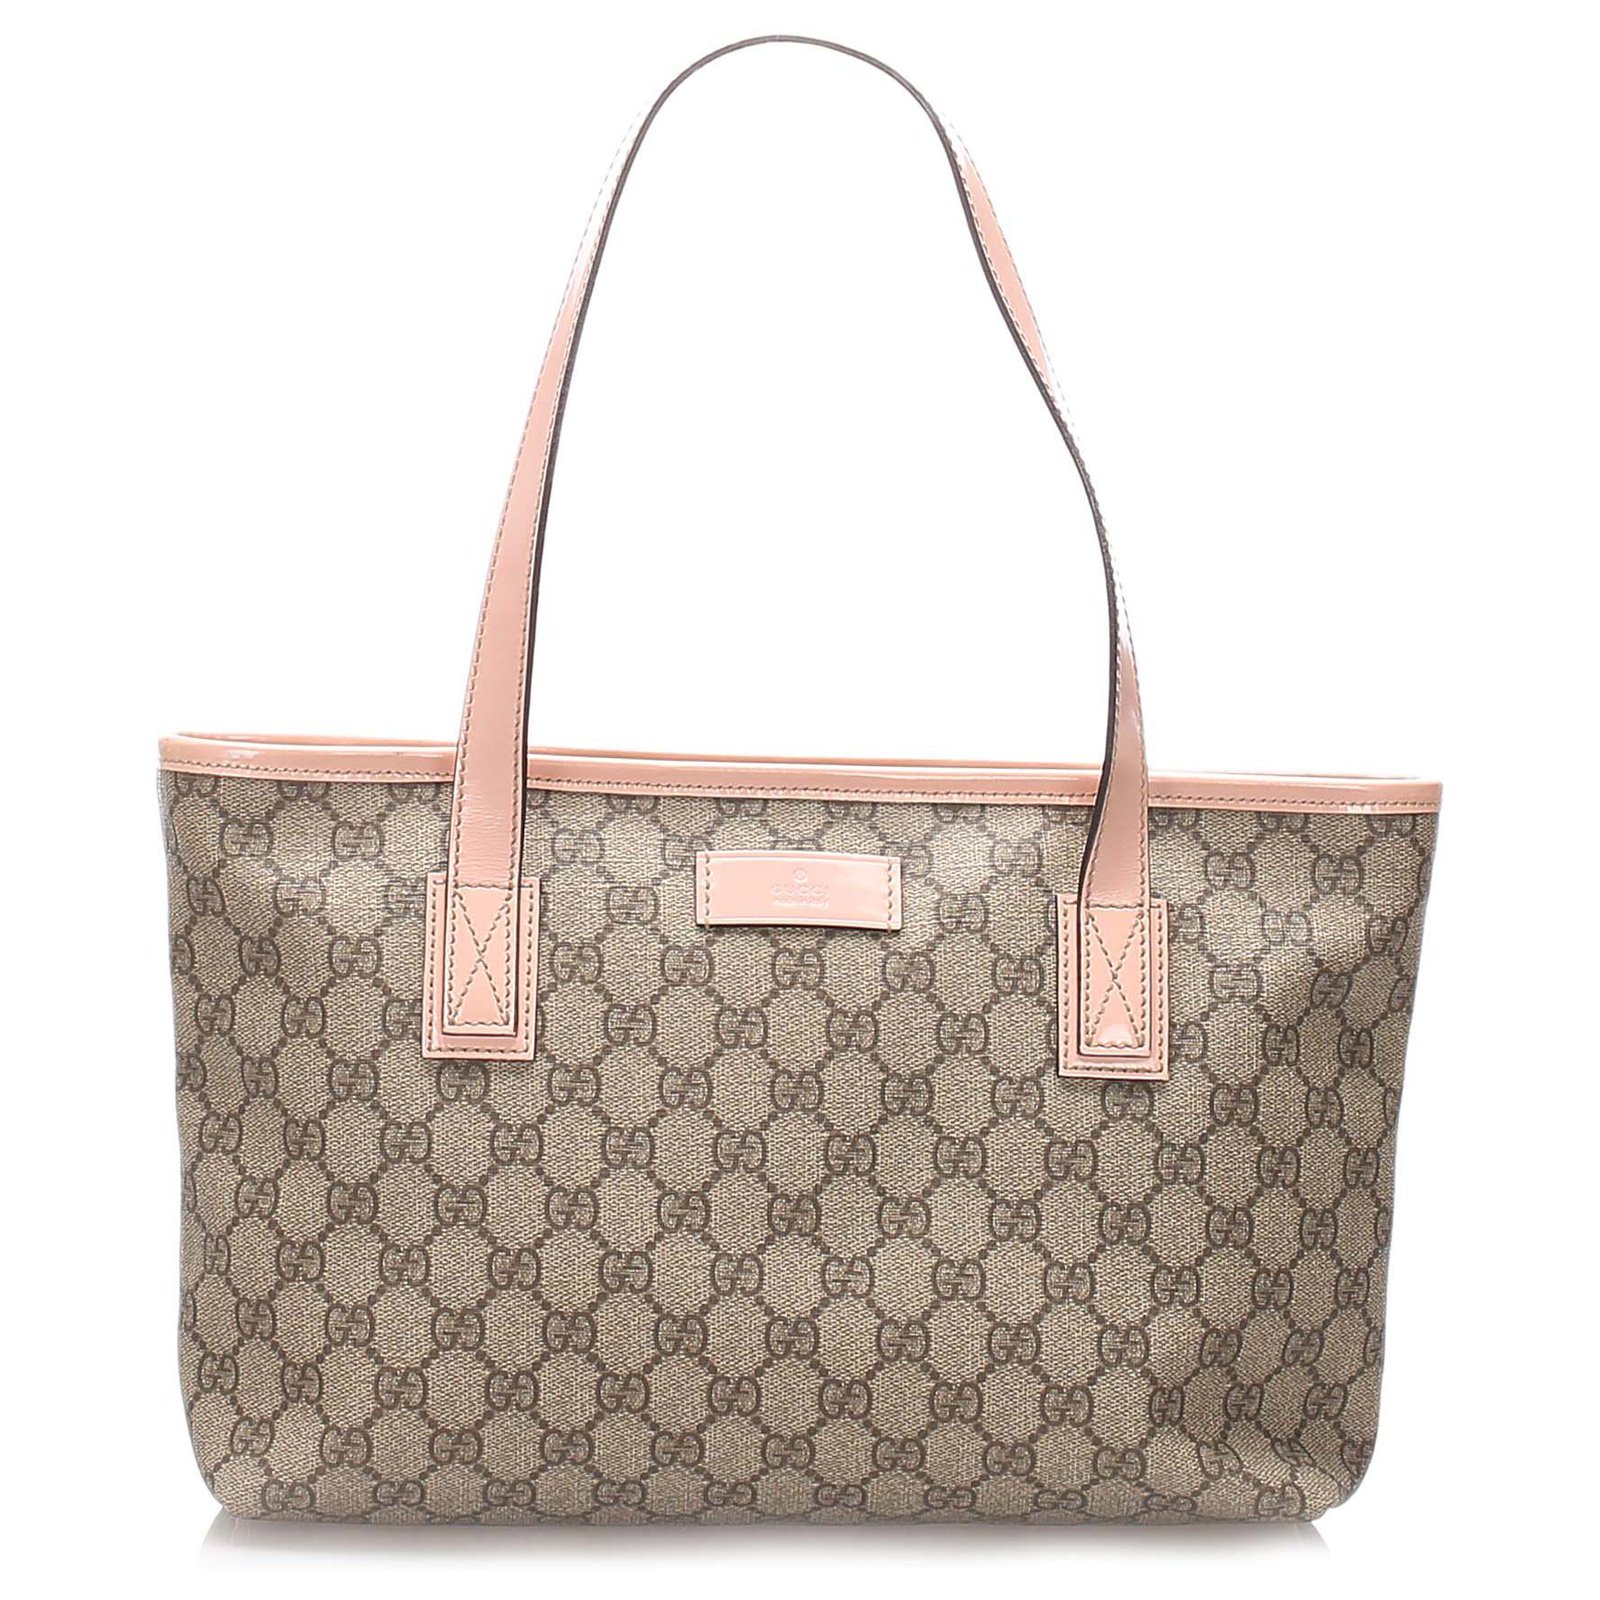 Gucci Beige/Pink GG Supreme Canvas and Leather Strawberry Print